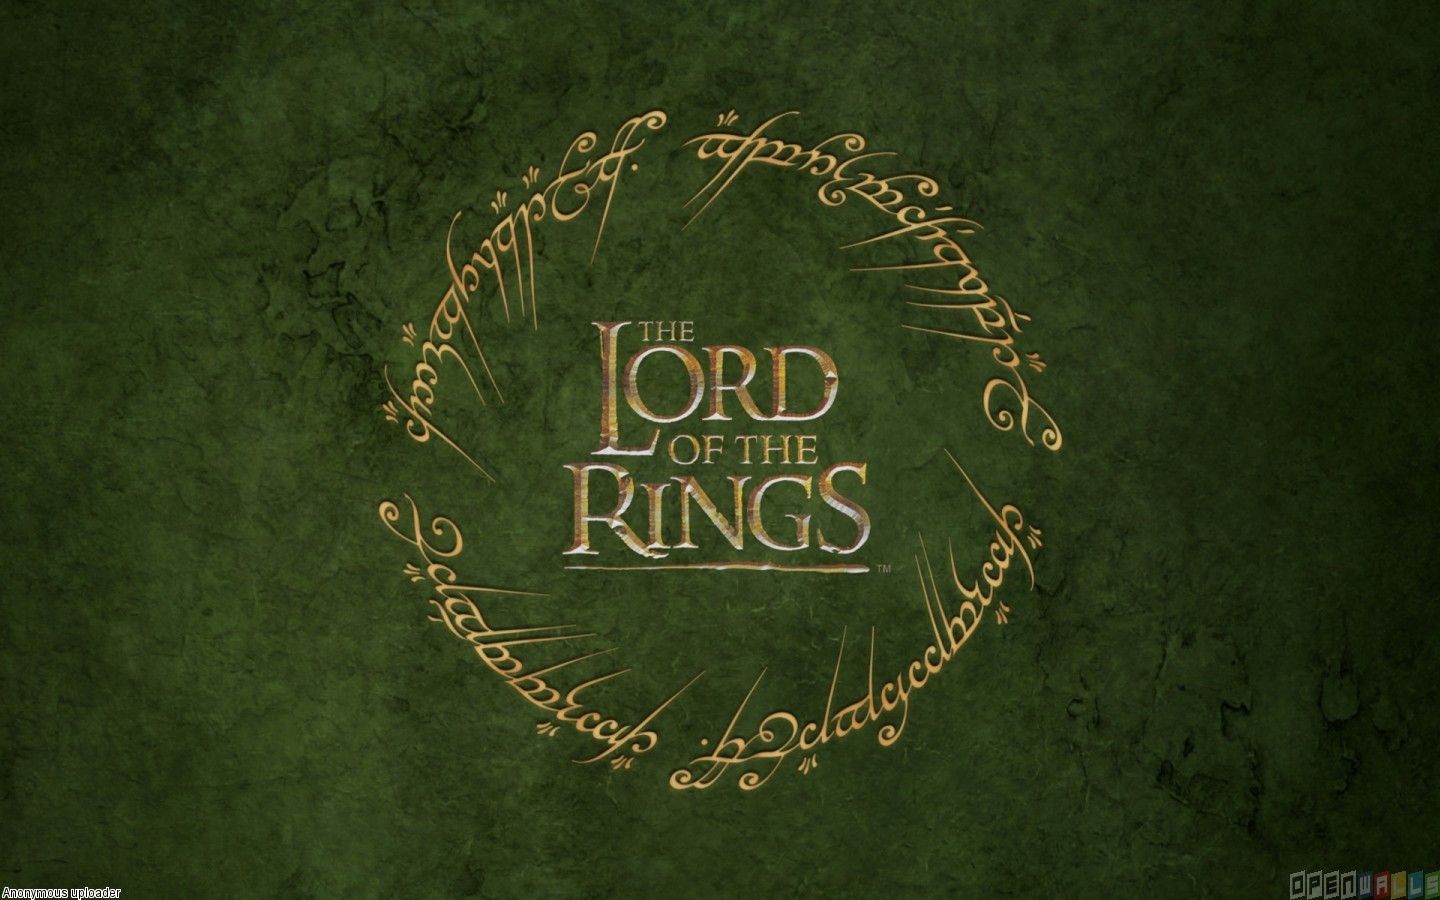 The Lord of the Rings Fonts Guide | Logaster